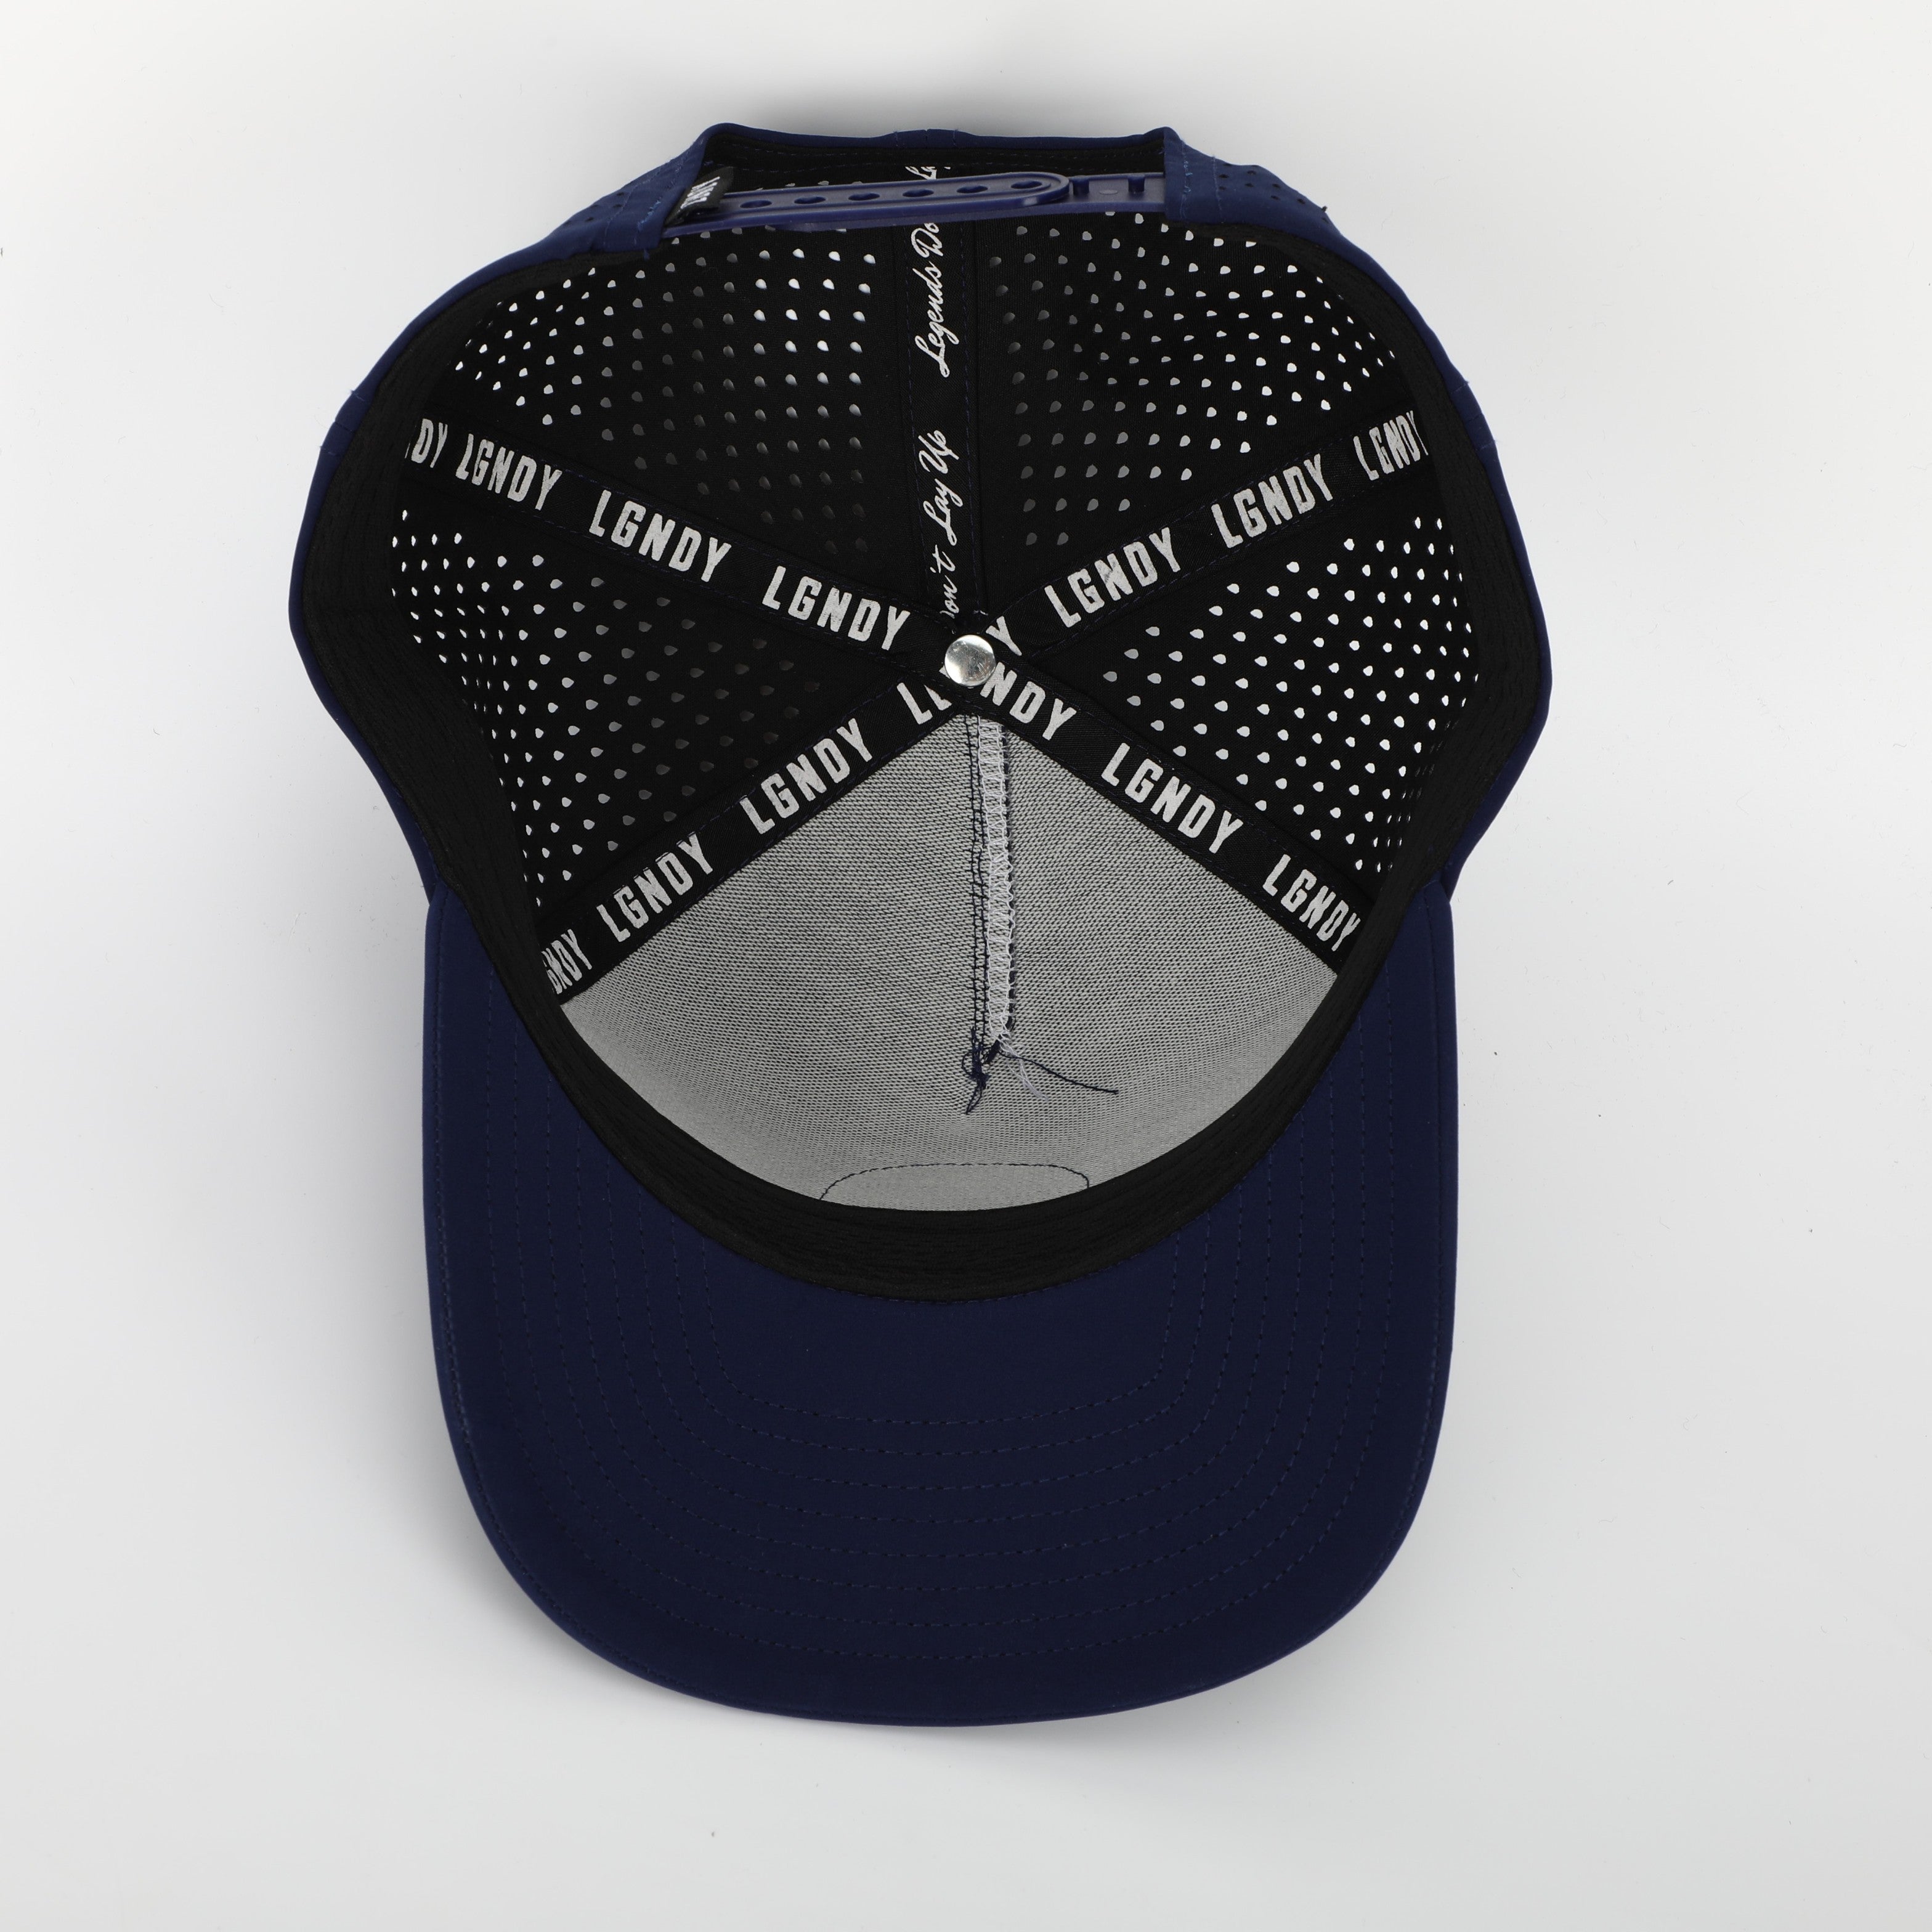 Go For It Hat - Navy Blue